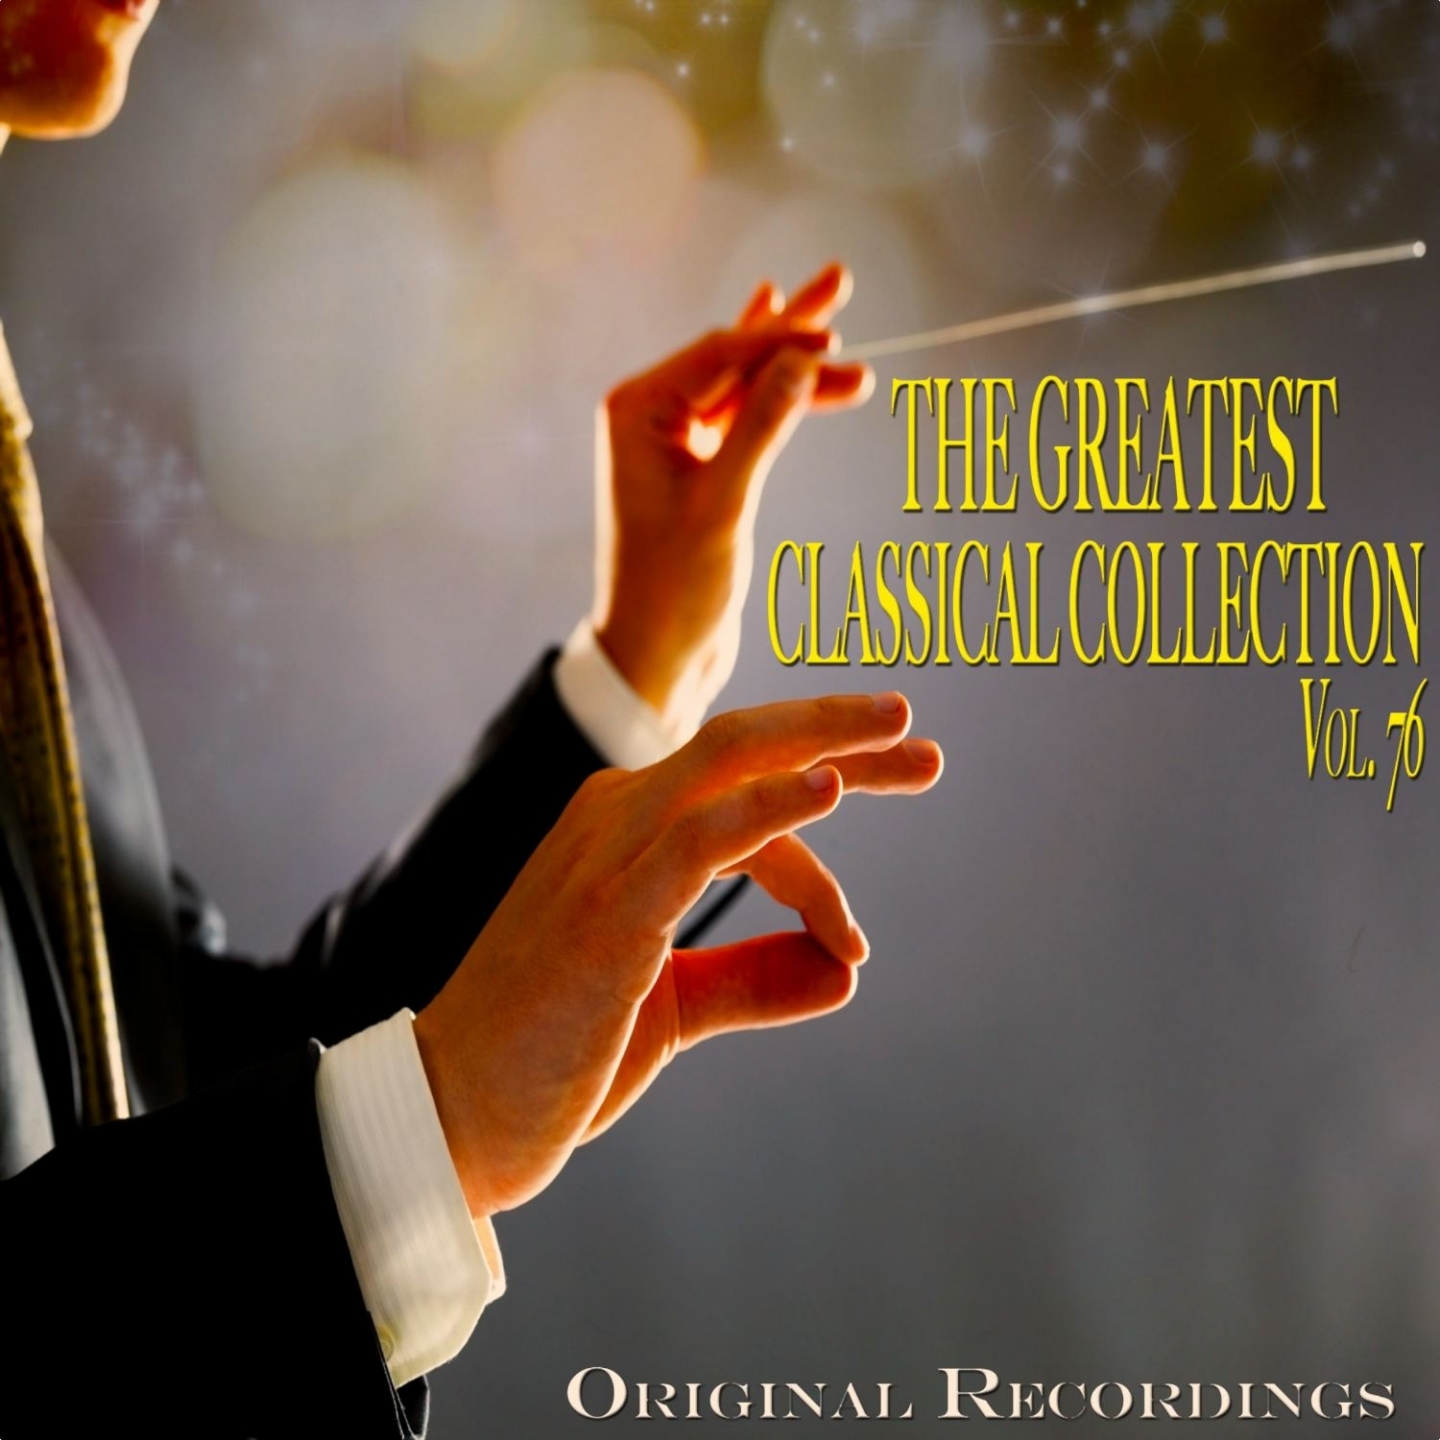 The Greatest Classical Collection Vol. 76